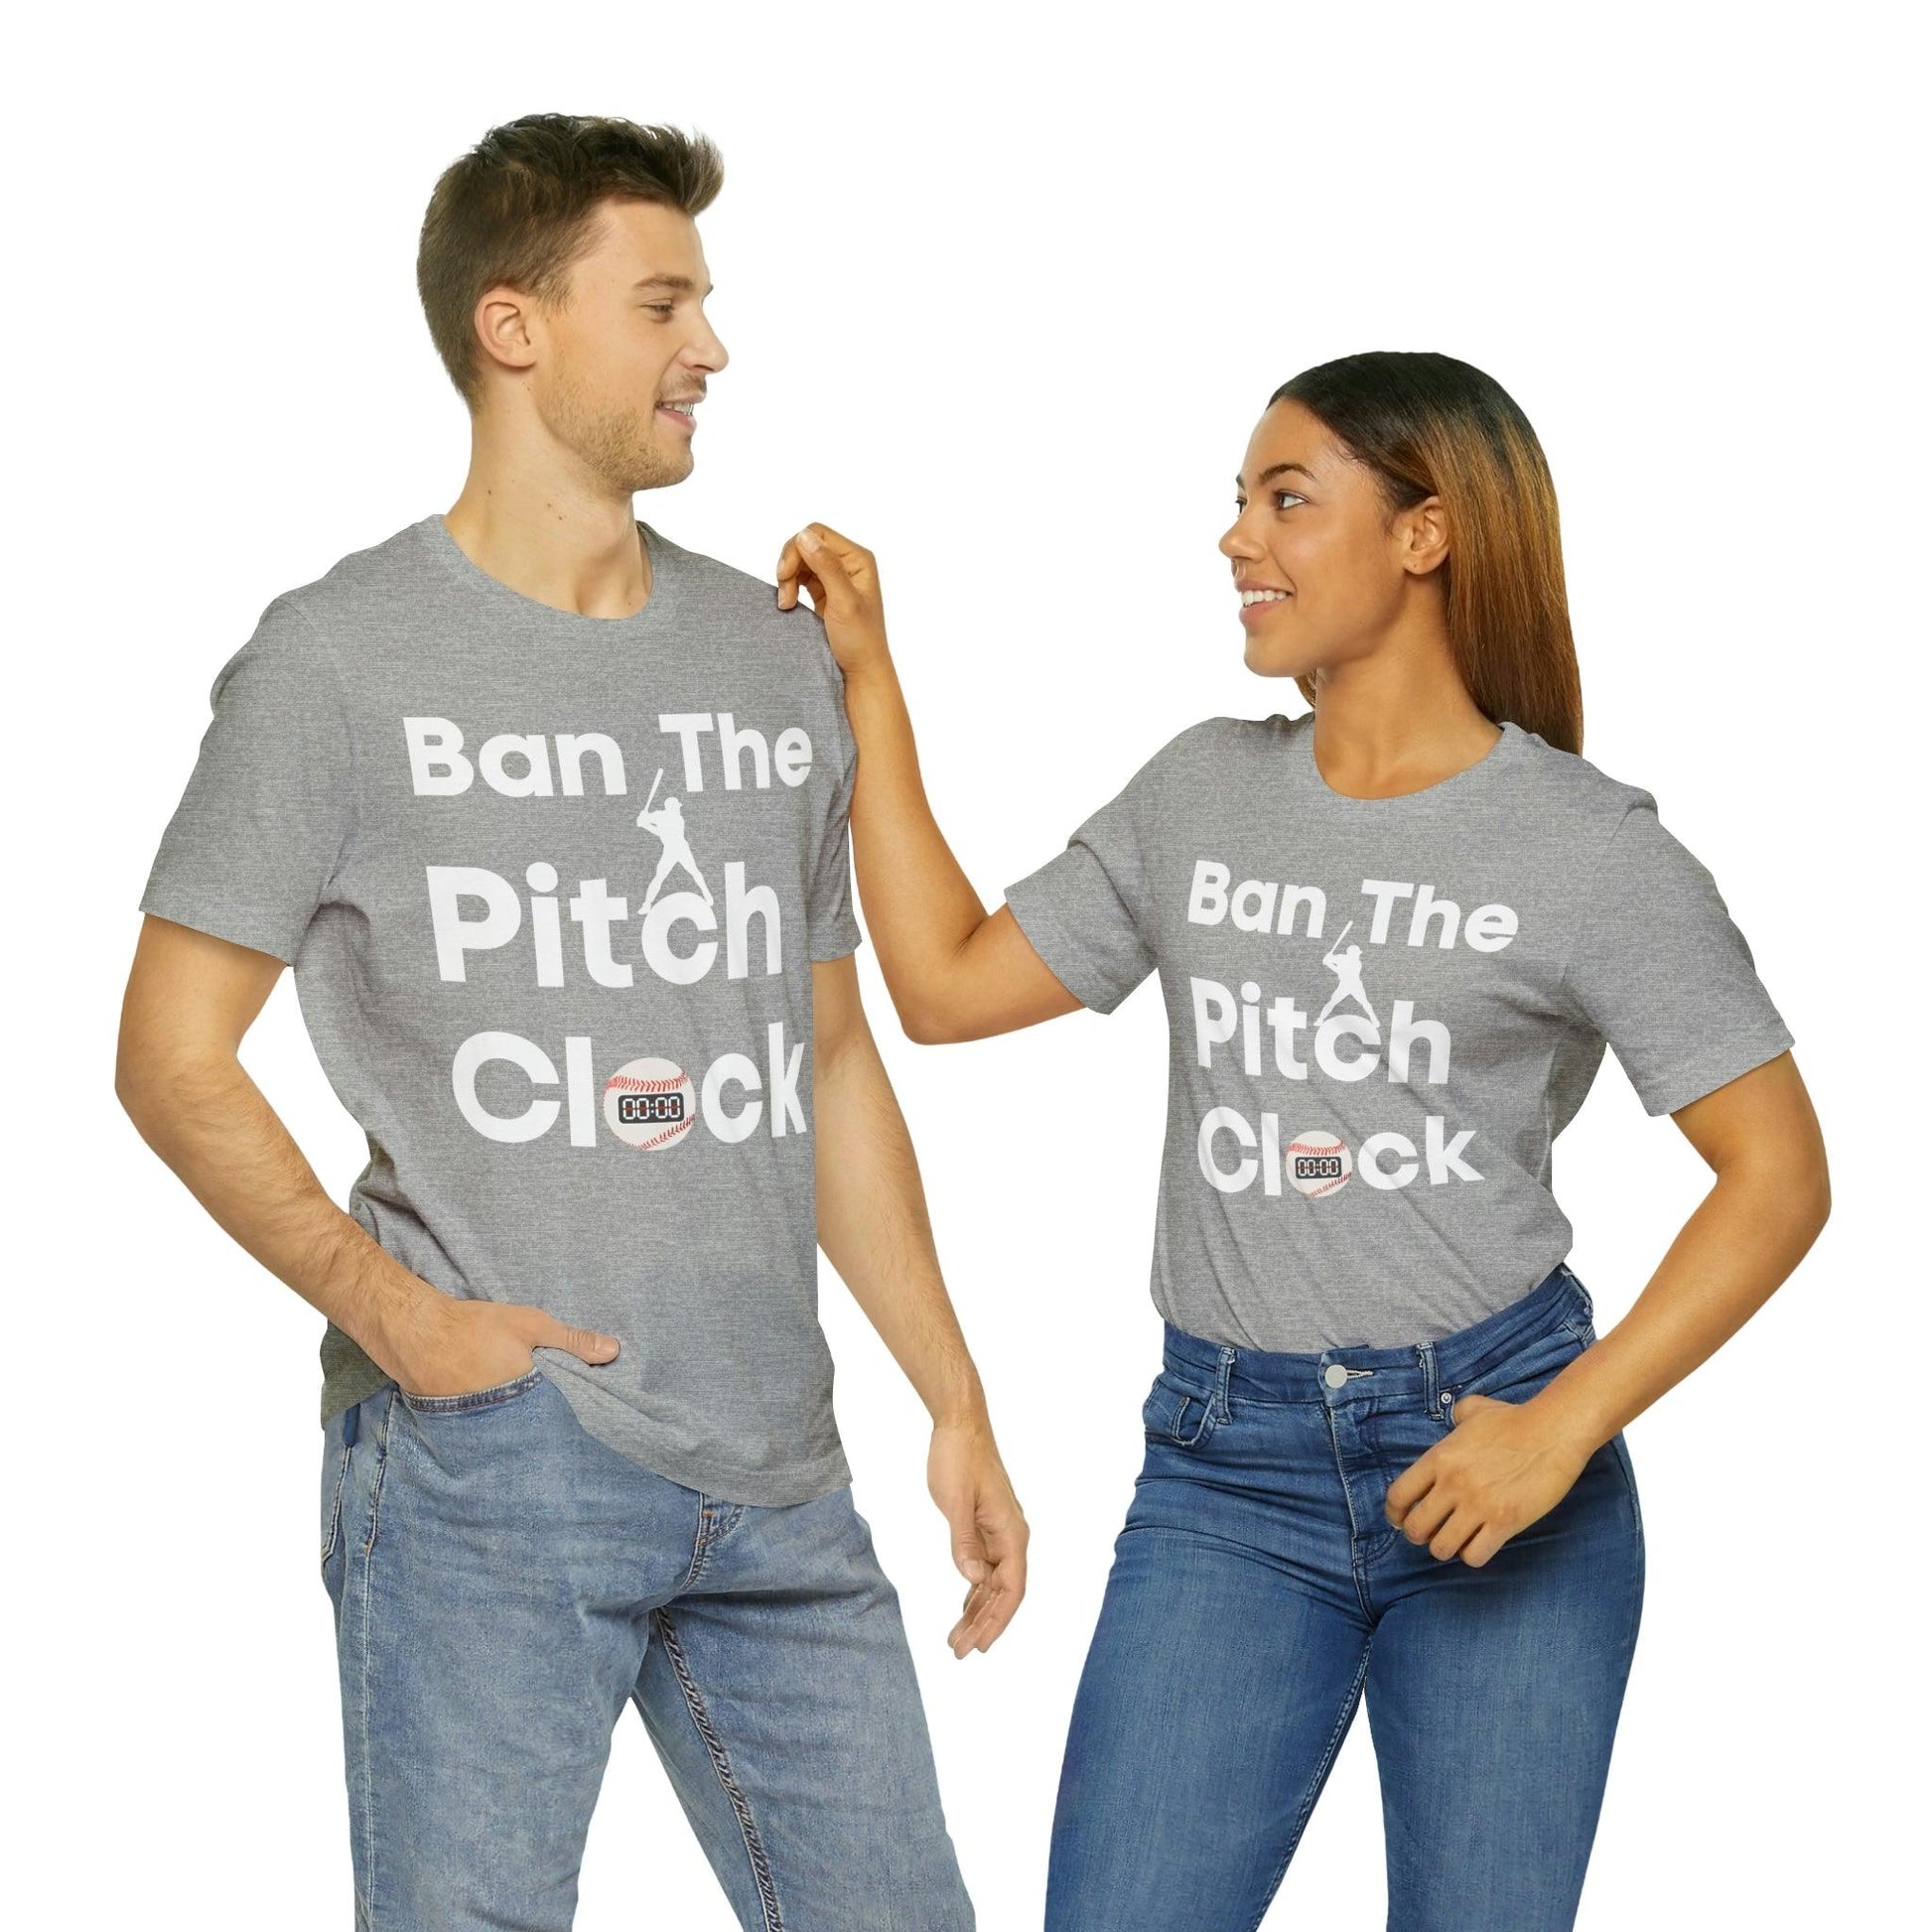 Ban The Pitch Clock in Baseball Ban Baseball Pitch Clock - Show Your Support By Wearing this shirt to the Games - Giftsmojo